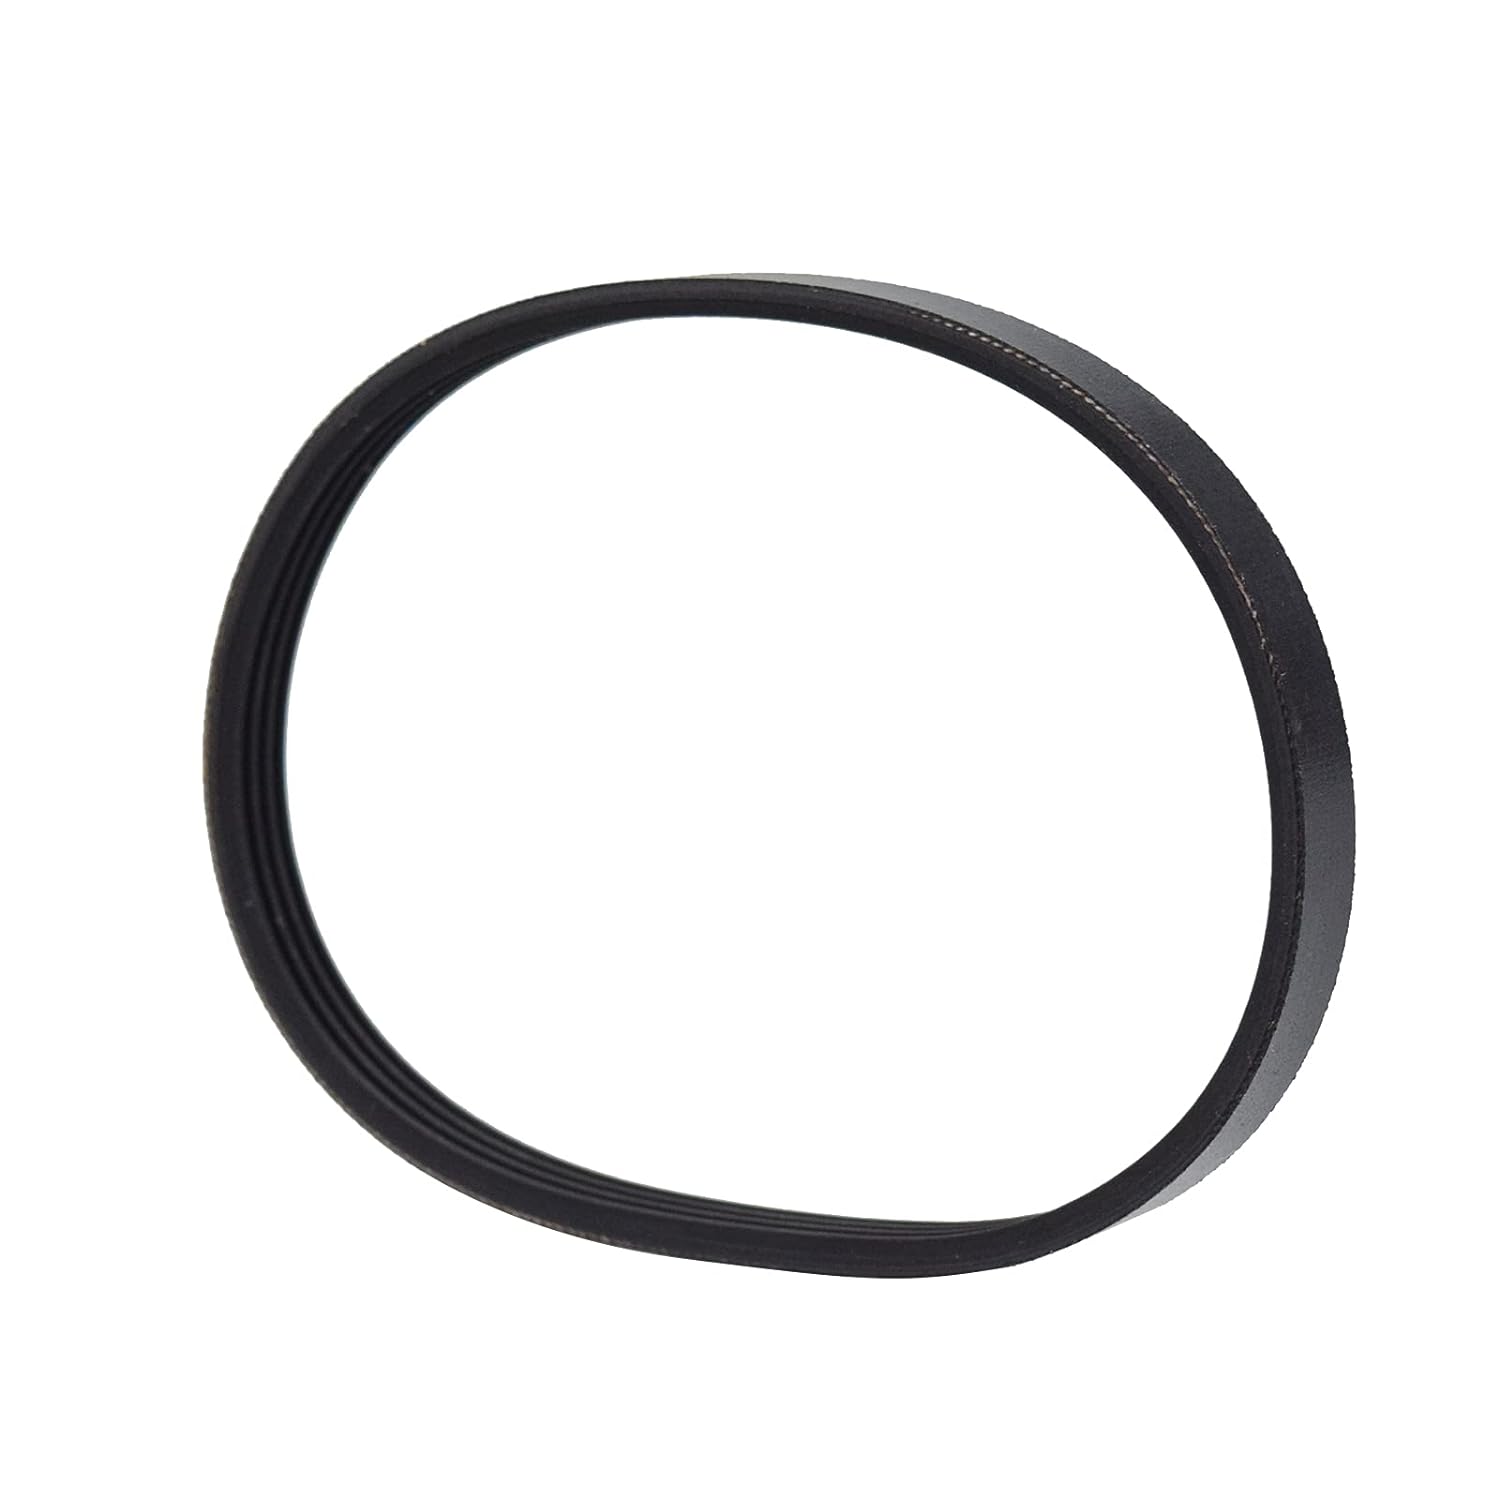 Generic Drive Belt for Sears Craftsman Model 124.21400 Band Saw Quality Rubber